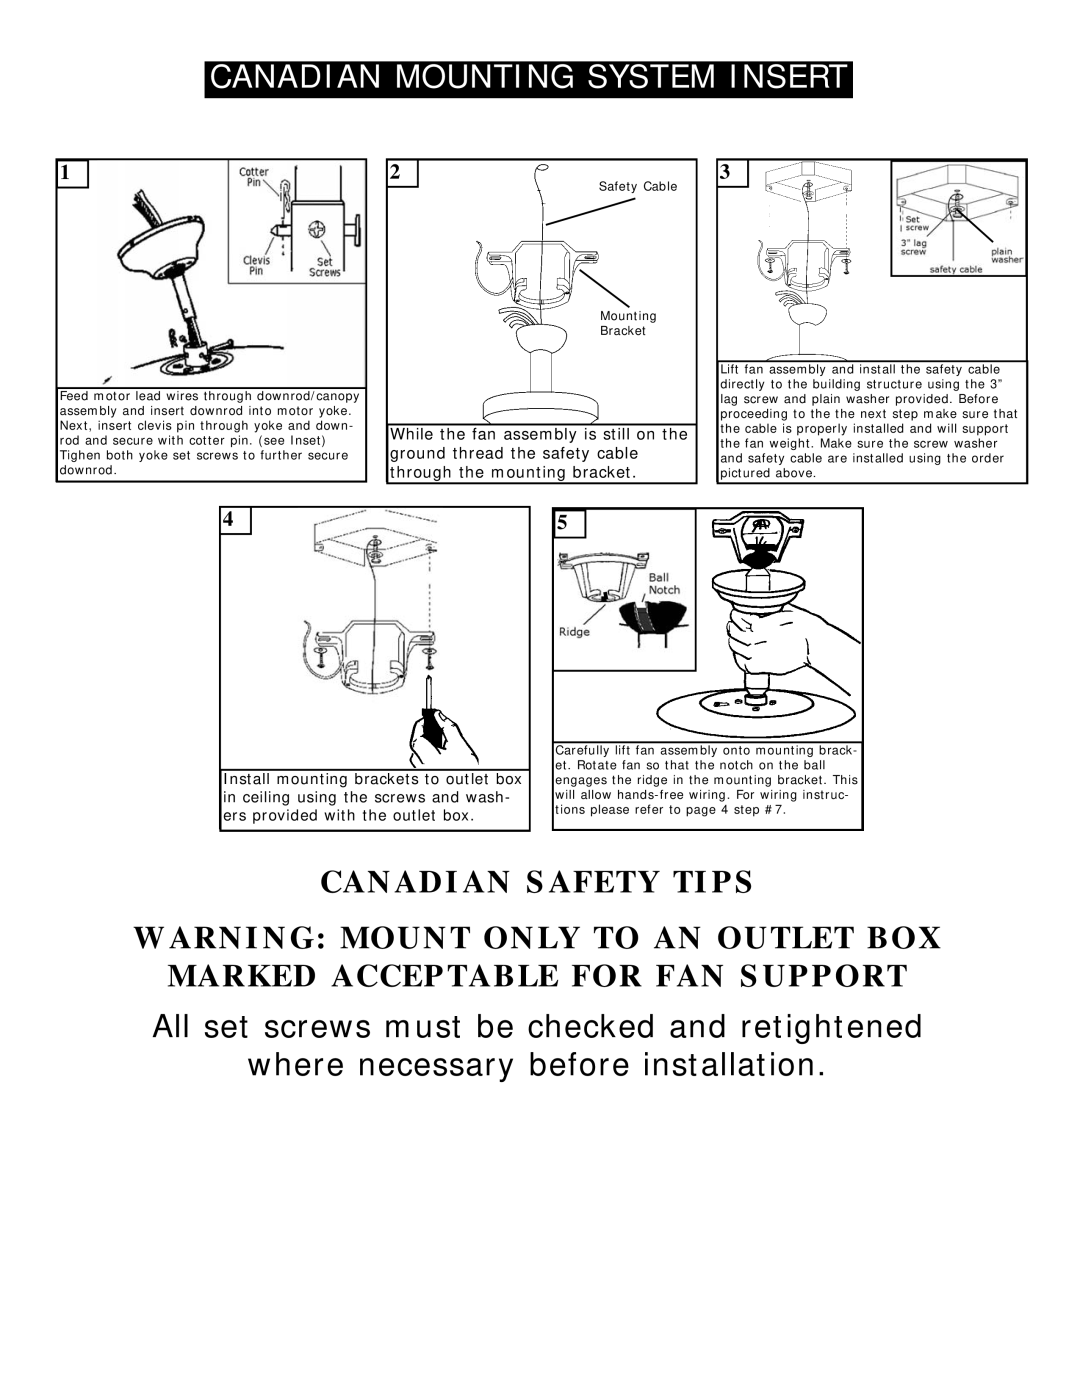 Monte Carlo Fan Company 5CZ52 Canadian Safety Tips, While the fan assembly is still on the, ground thread the safety cable 